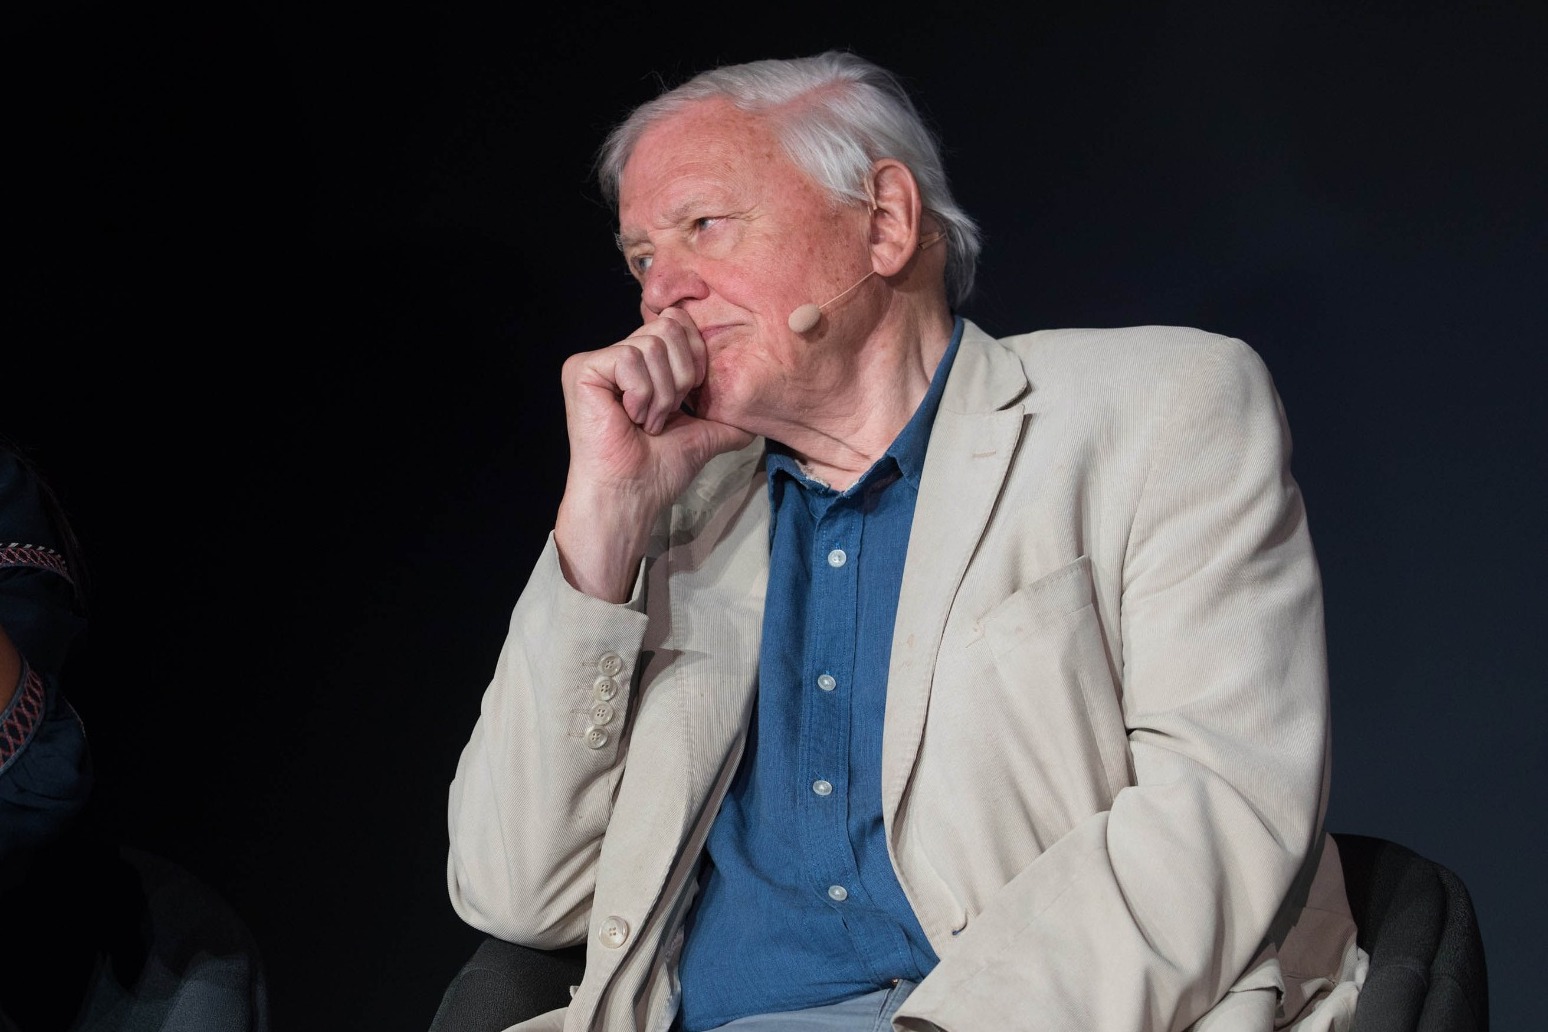 ALMOST 80,000 APPLY TO WATCH FIRST EPISODE OF NEW DAVID ATTENBOROUGH SERIES 